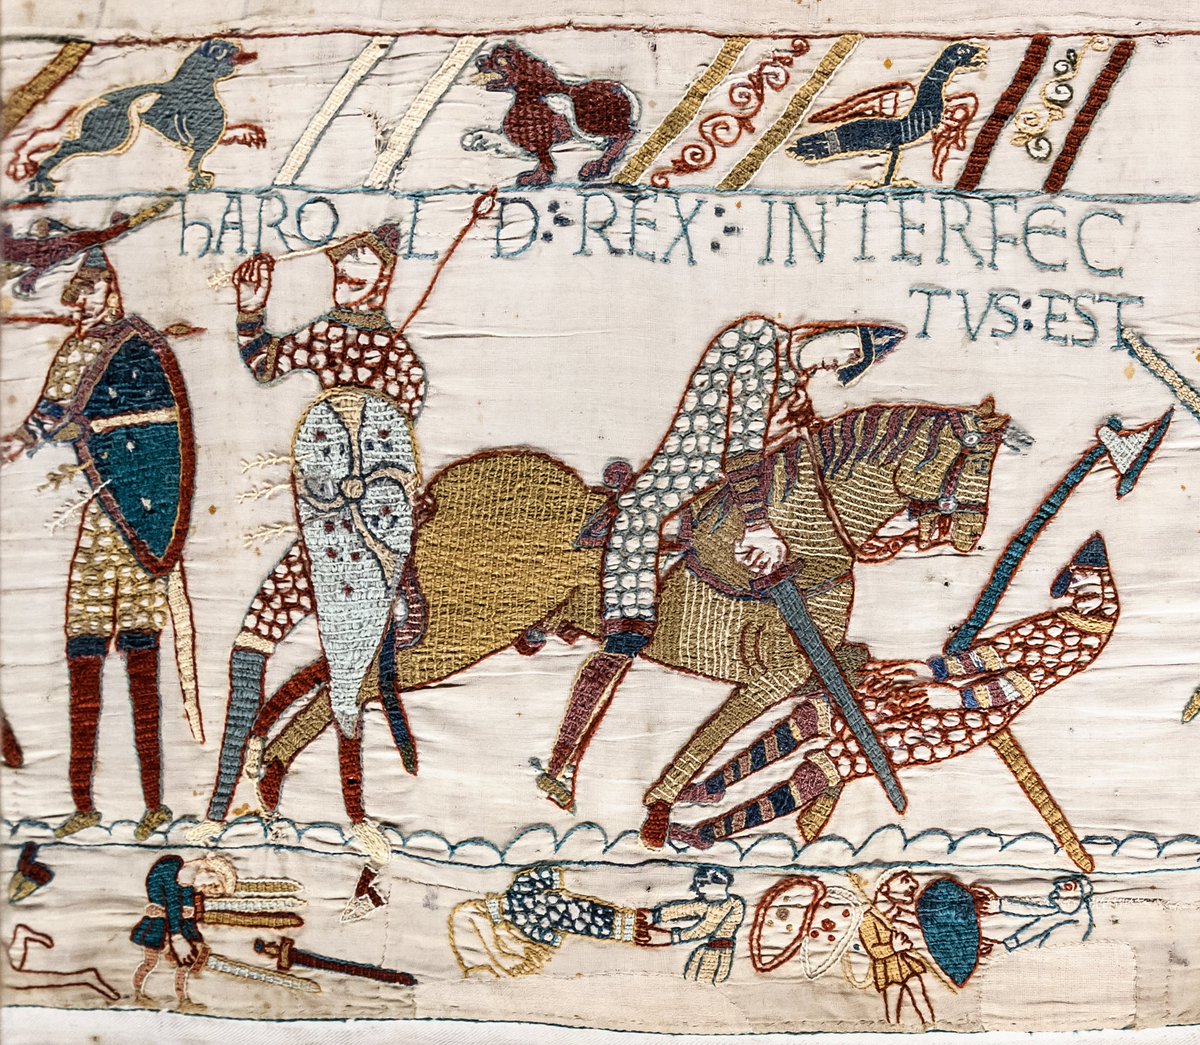 14 October 1066 Battle of Hastings sees King Harold II face Duke William of Normandy. Harold had the high ground & began strongly, but when his shield wall broke to chase retreating Normans, it created a weak point William exploited. Anglo-Saxon England was ended with Harold.